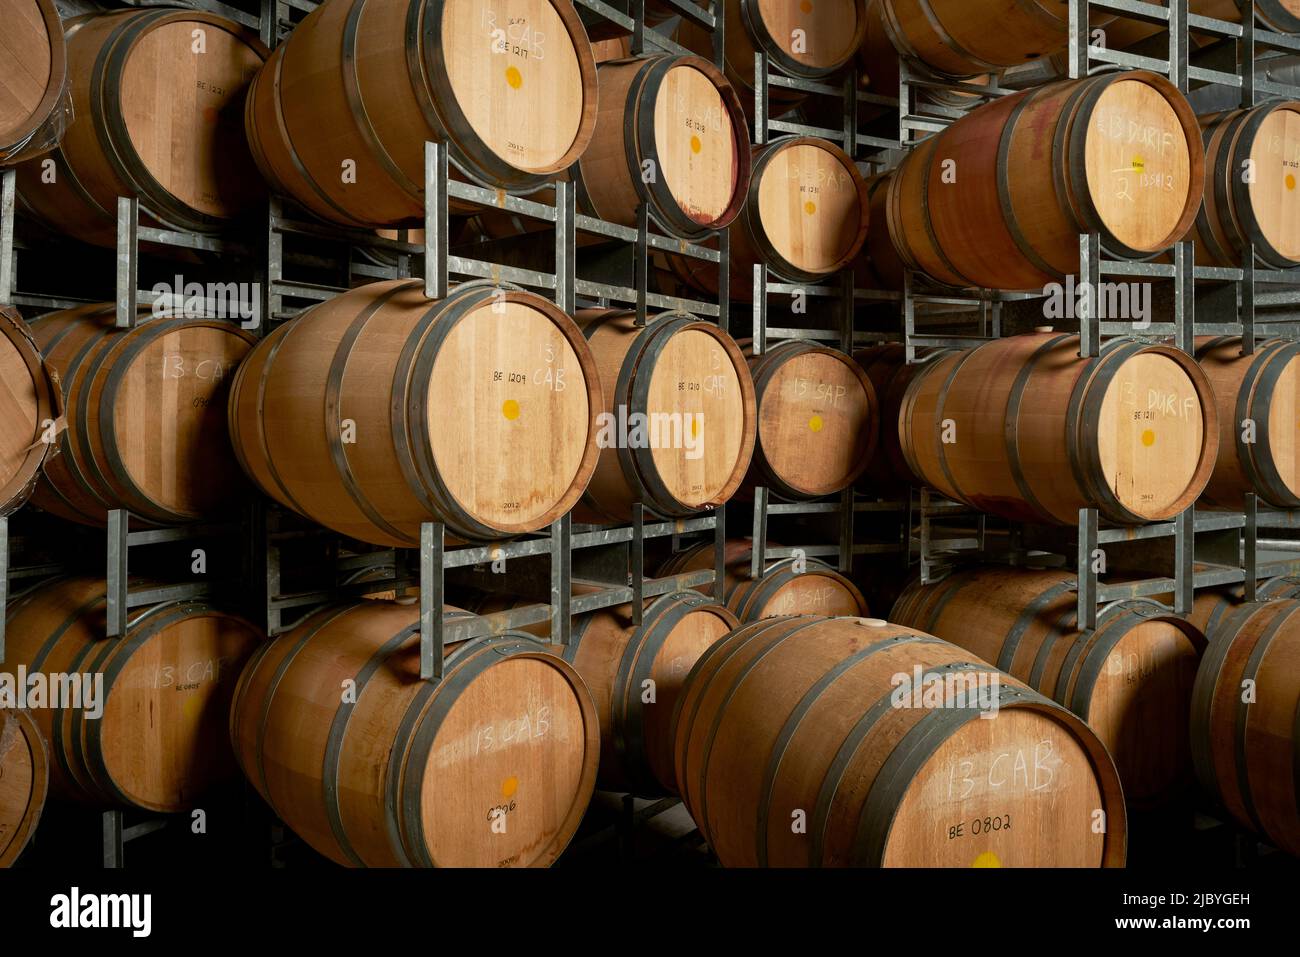 Rows of wine barrels on storage racks in cellar for aging wine Stock Photo